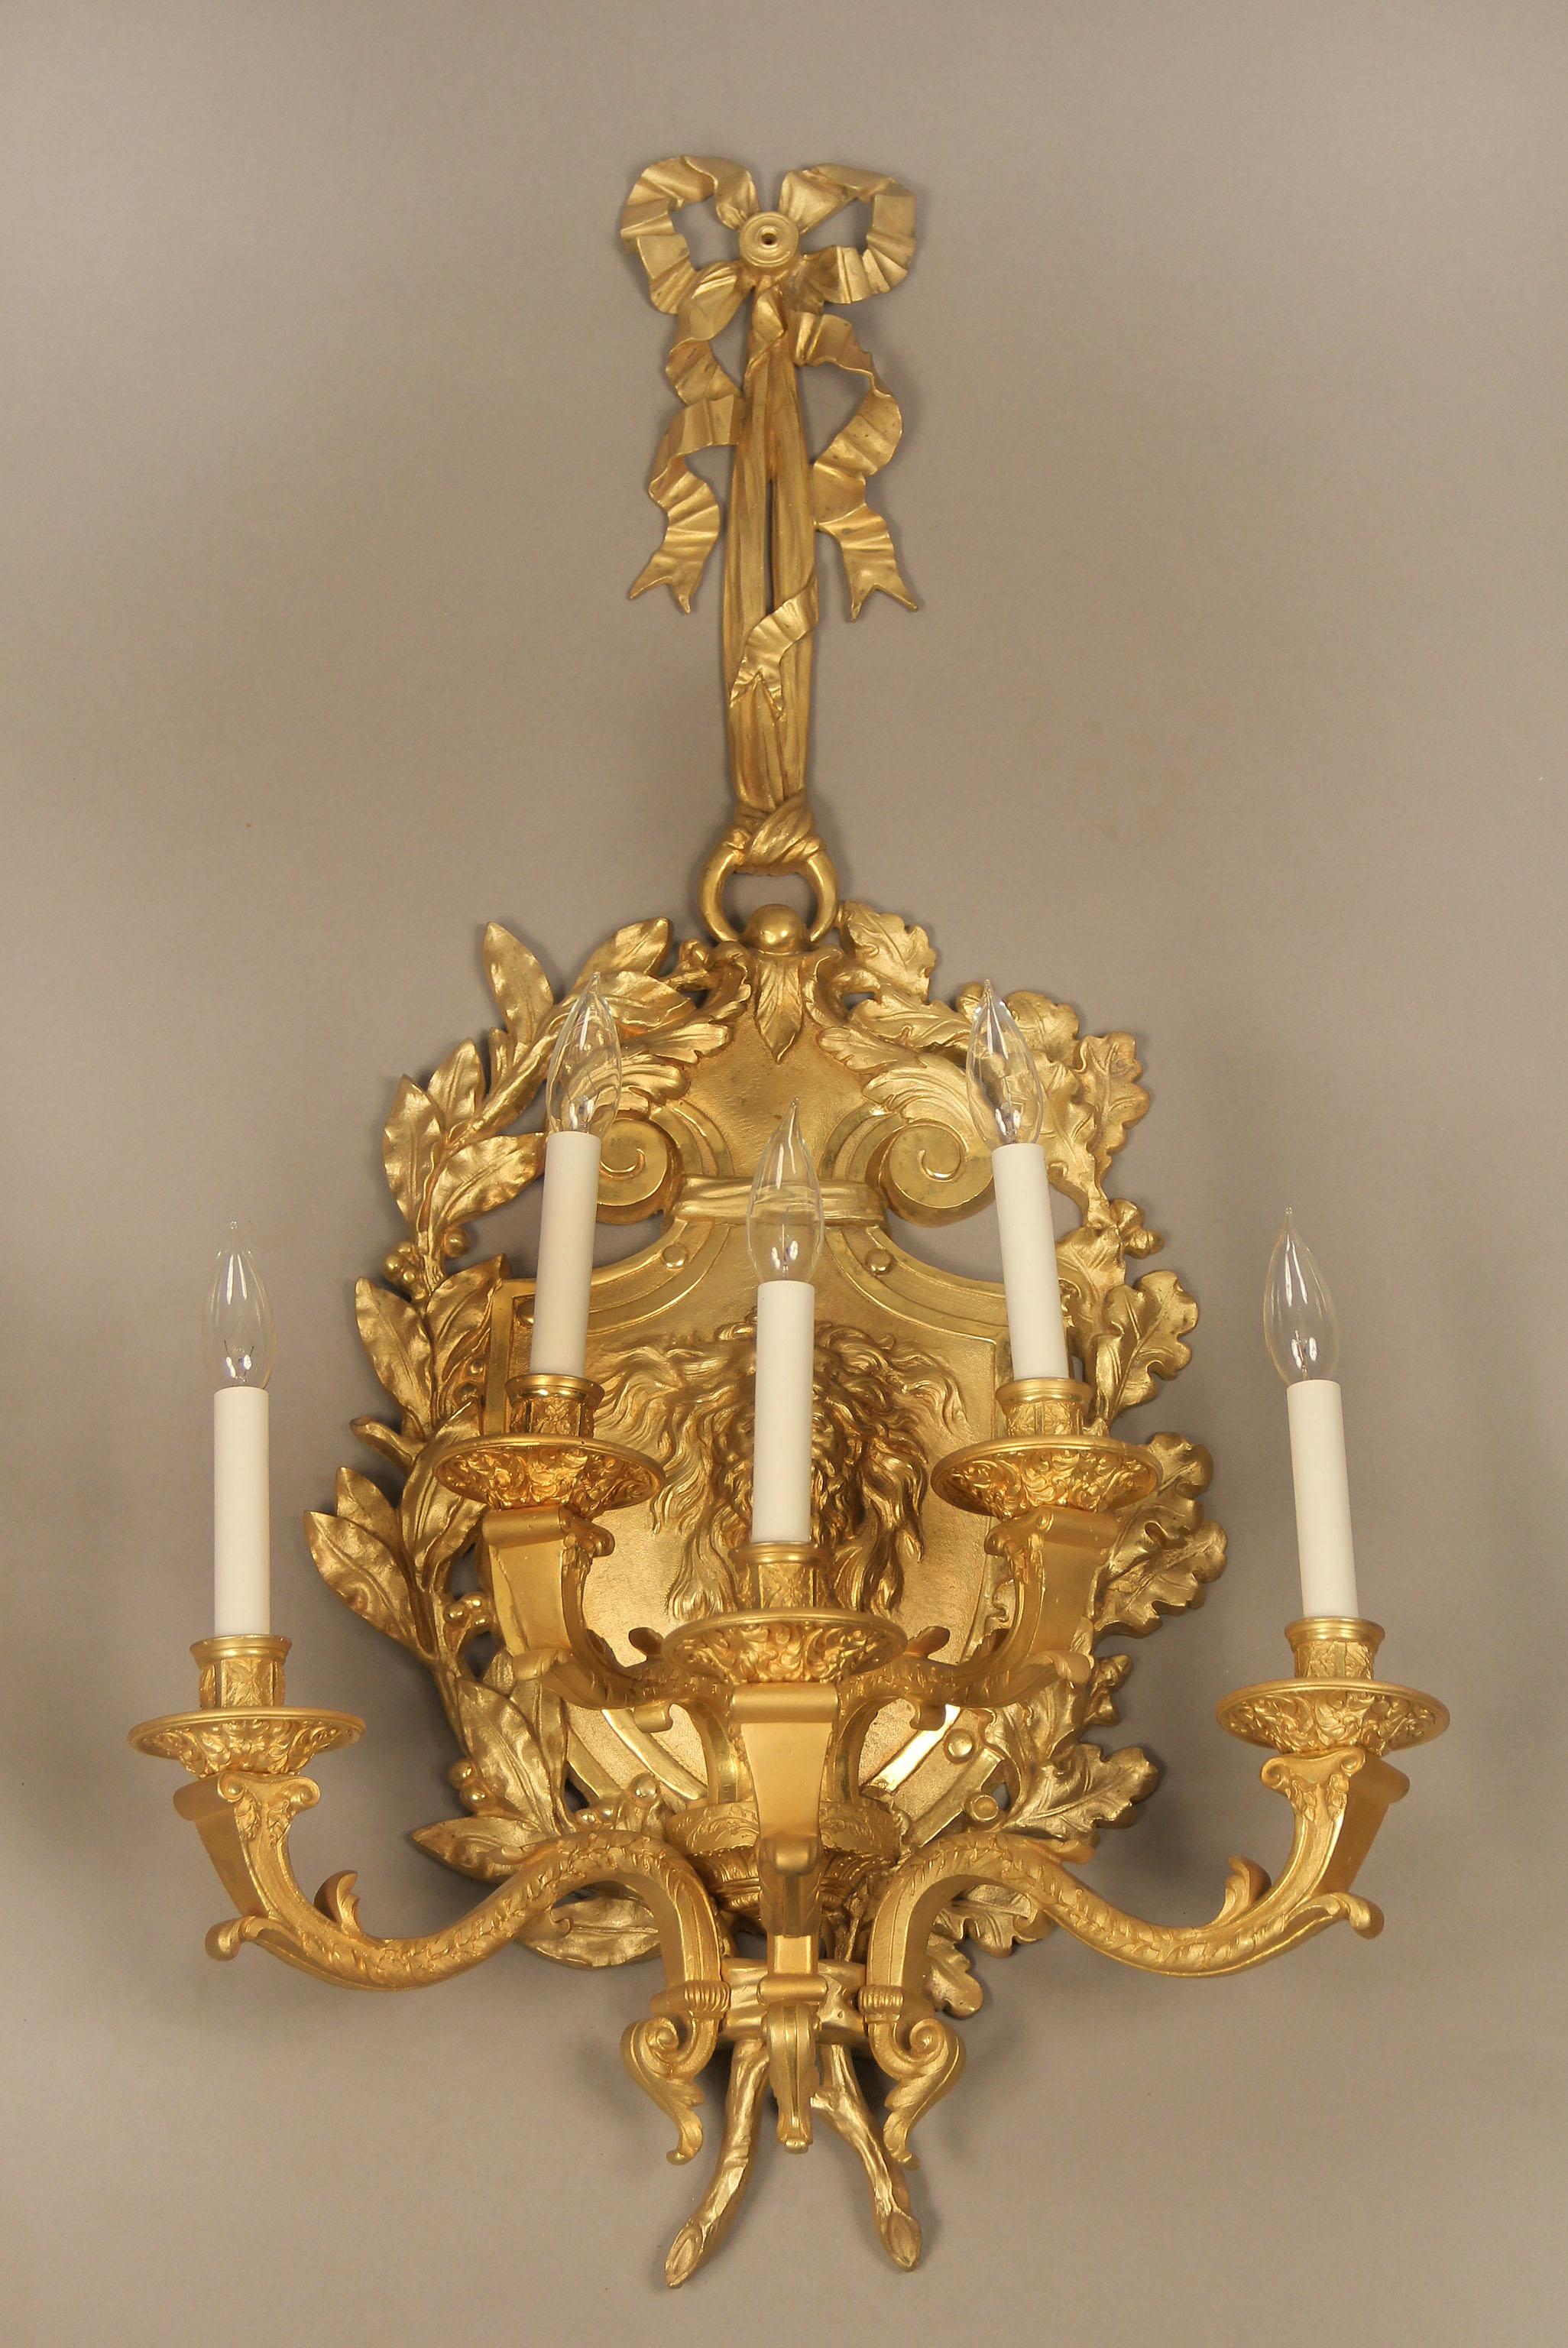 A large and fine pair of late 19th century gilt bronze 5-light sconces.

Centered with a mask of a bearded man with a lion pelt hat flanked by acanthus and laurel leaves along the sides, the top as a ribbon and bow, five tiered lights.